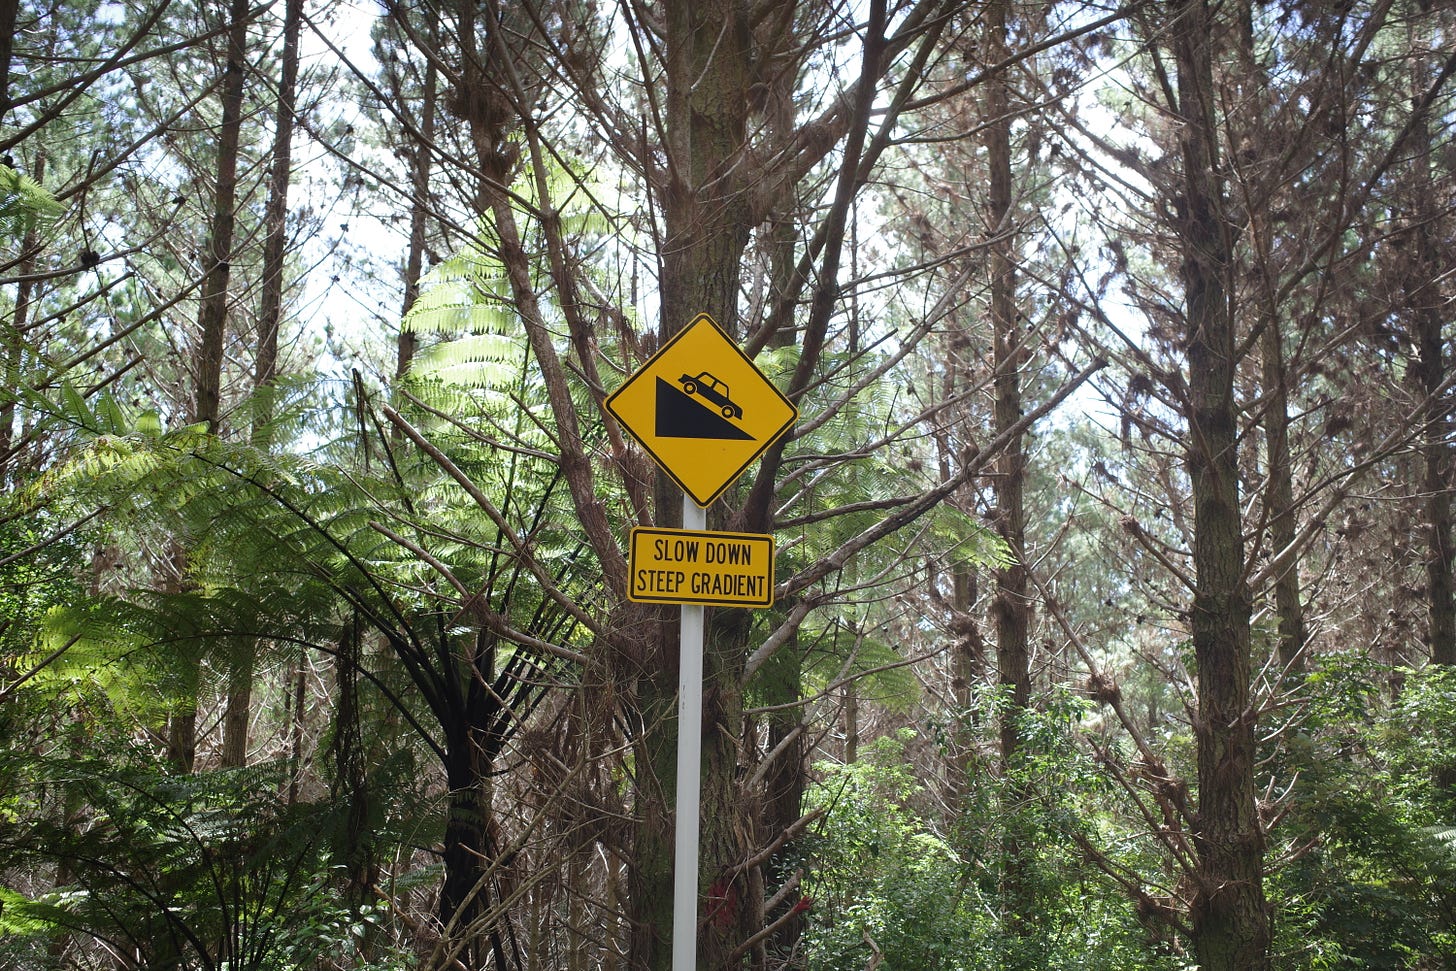 A sign in the bush saying "slow down - steep gradient"